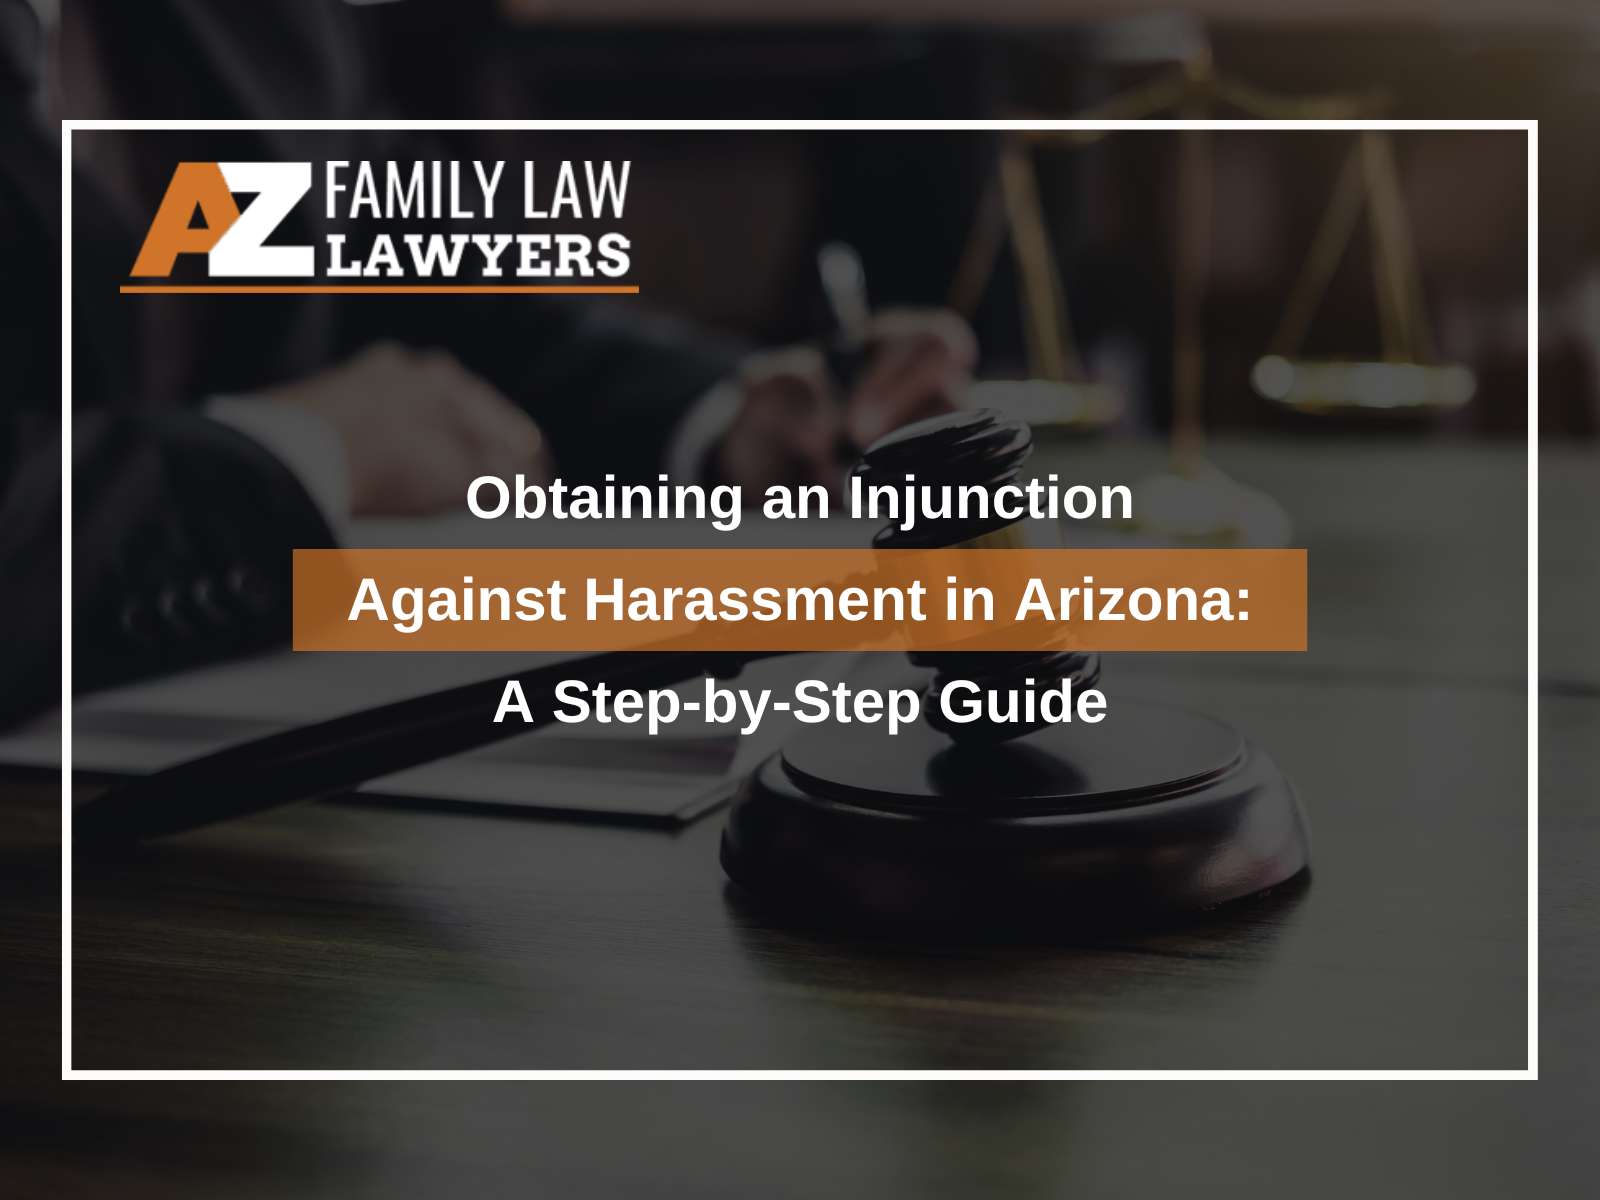 Obtaining an Injunction Against Harassment in Arizona: A Step-by-Step Guide